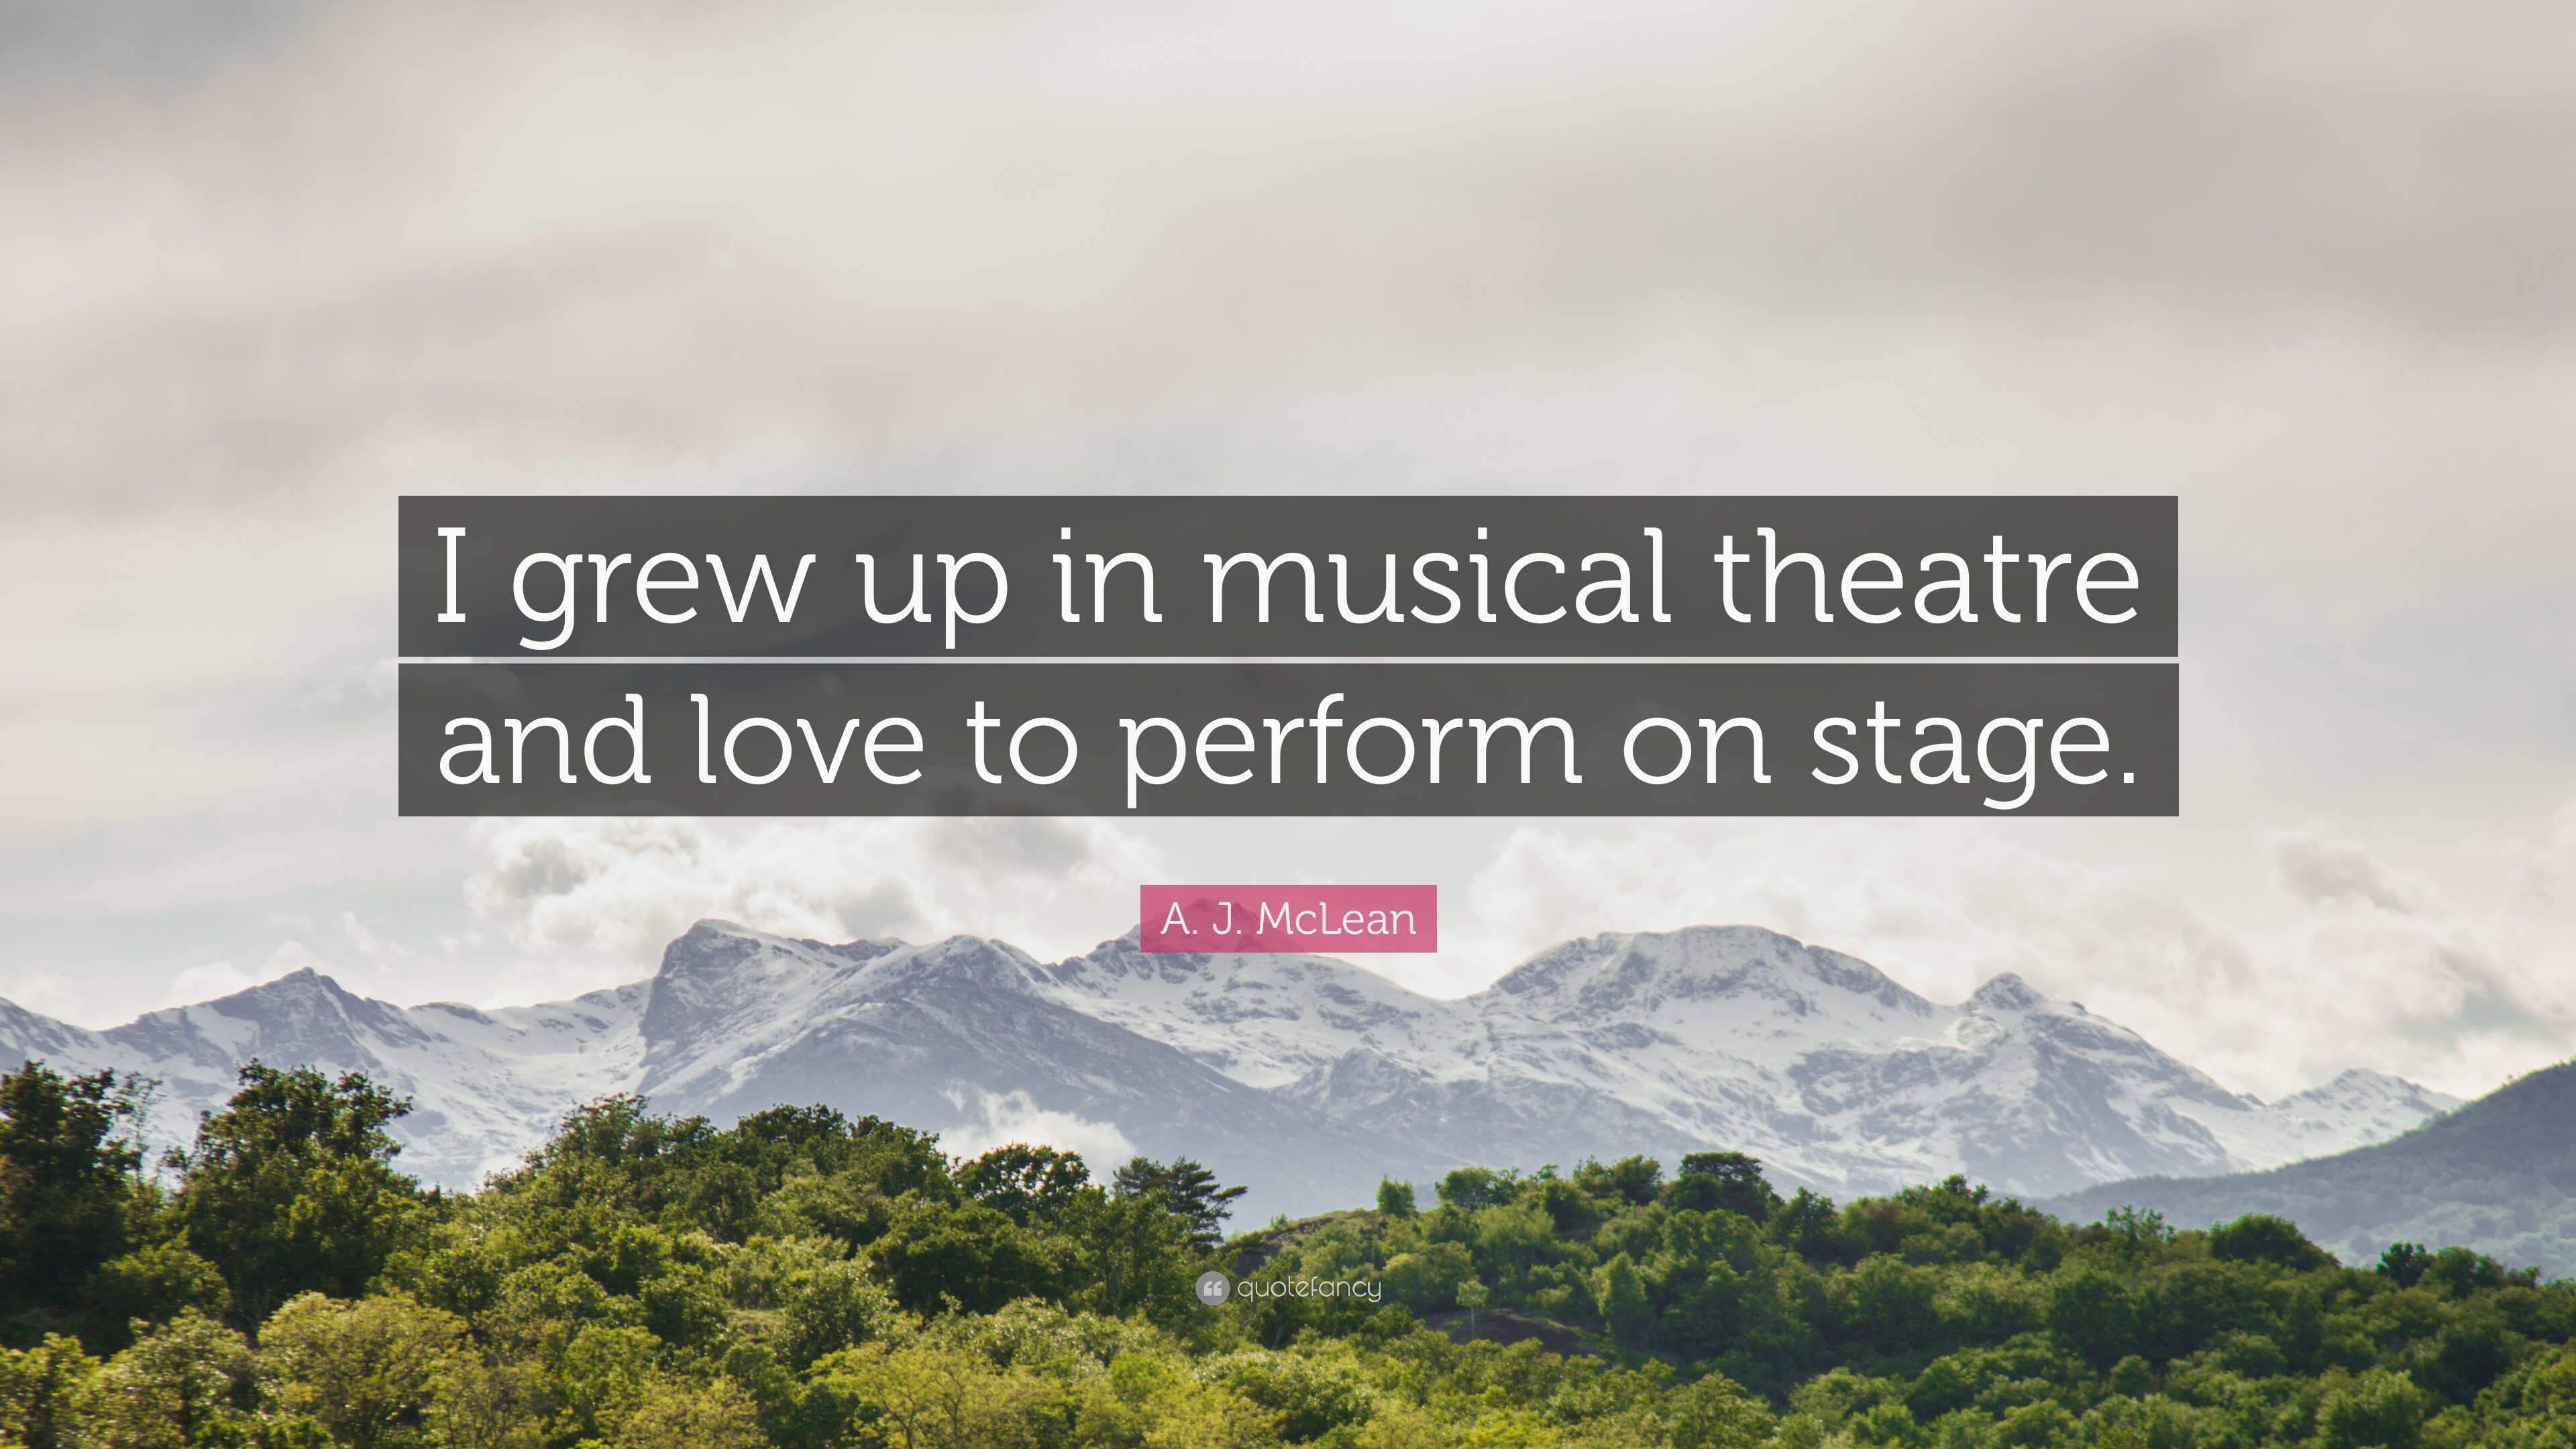 A. J. McLean Quote: “I grew up in musical theatre and love to